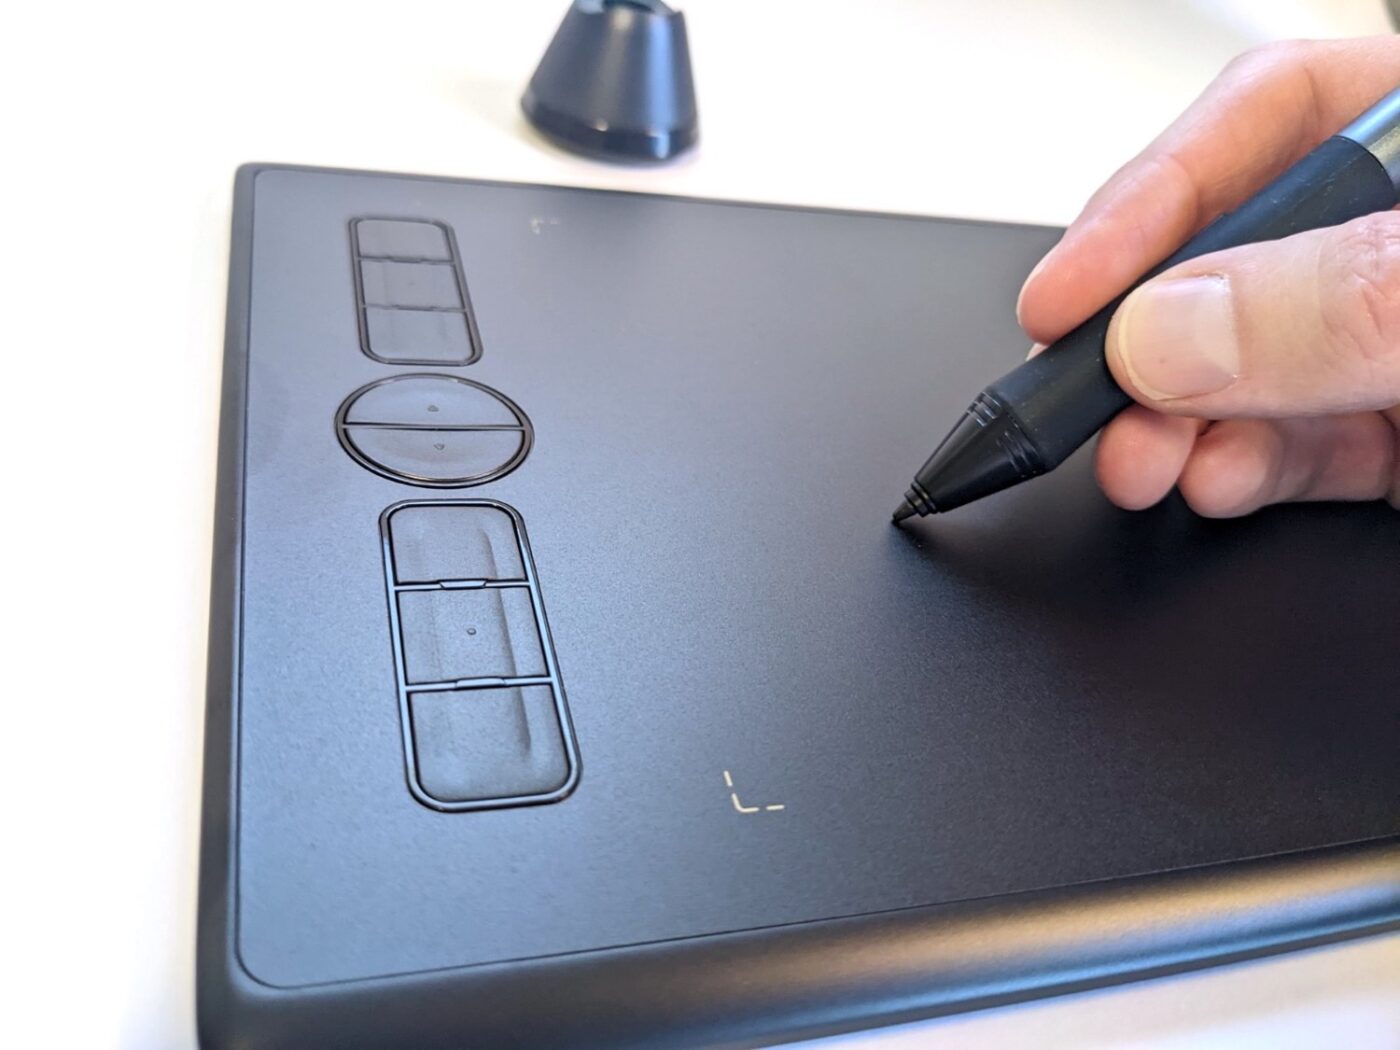 Hands on with the Huion Inspiroy H580x Graphics Tablet » Mega Pencil